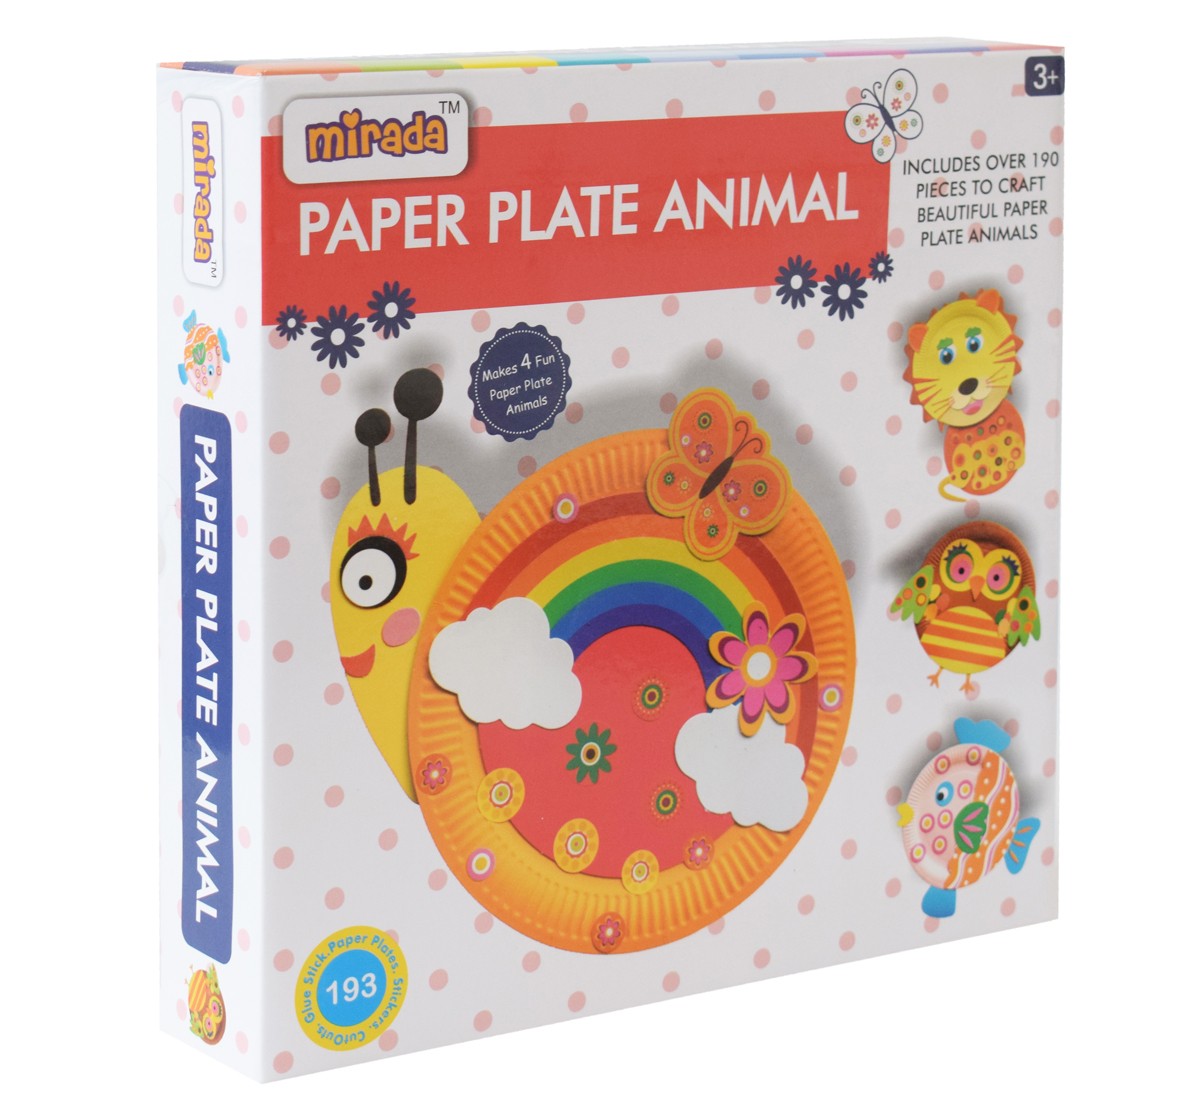 Paper Plate Art Kit Toy by Mirada for Kids of Age 2 Years & Above, Fun Preschool Classroom Activity Project for Boy & Girl